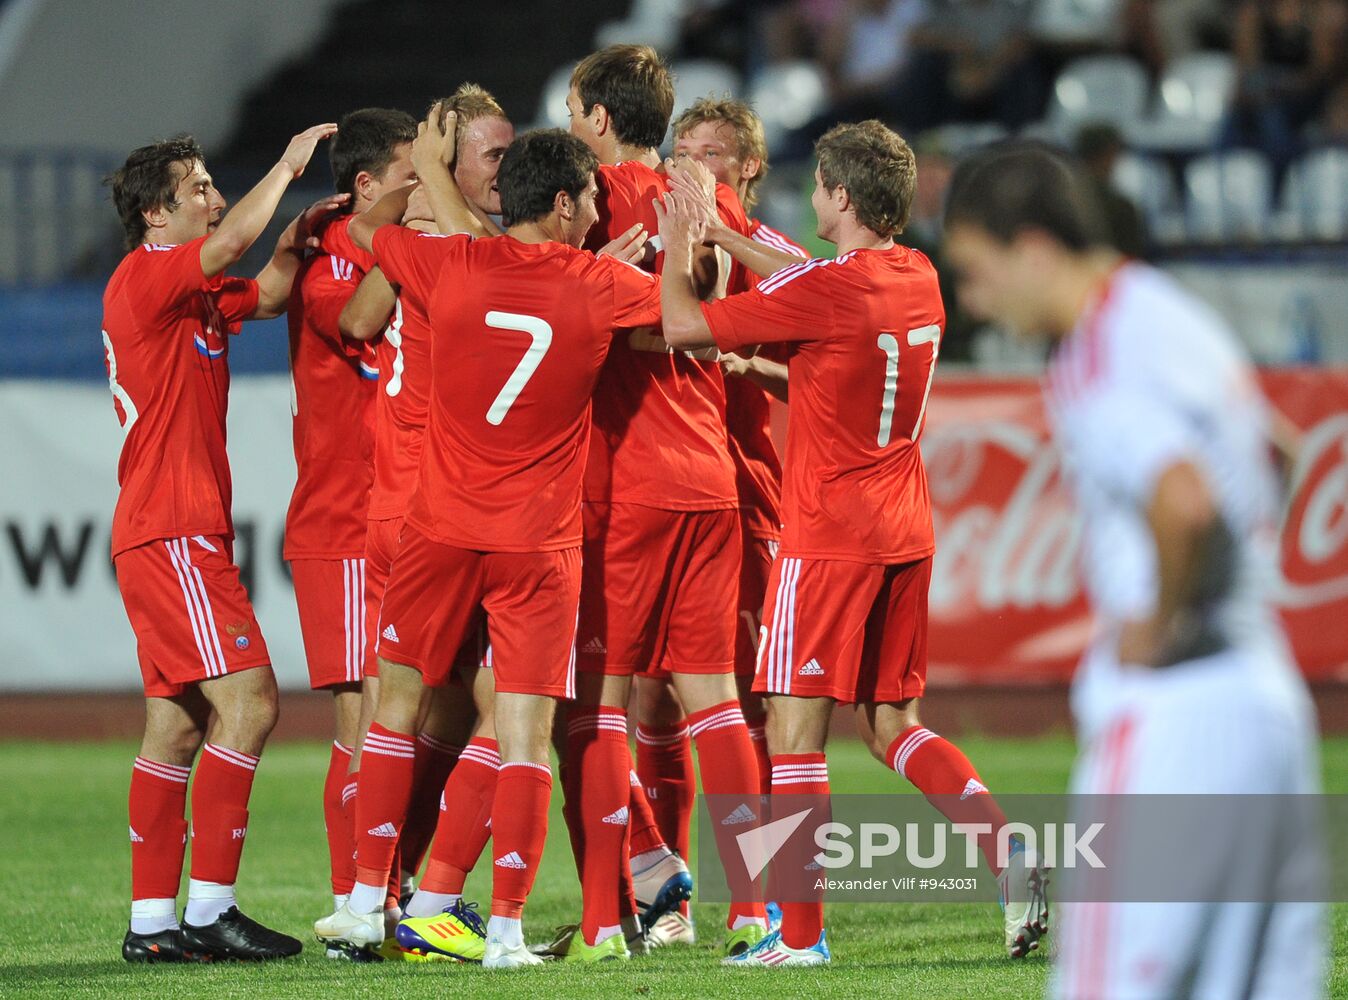 Russia's 2nd football squad vs. youth team friendly match